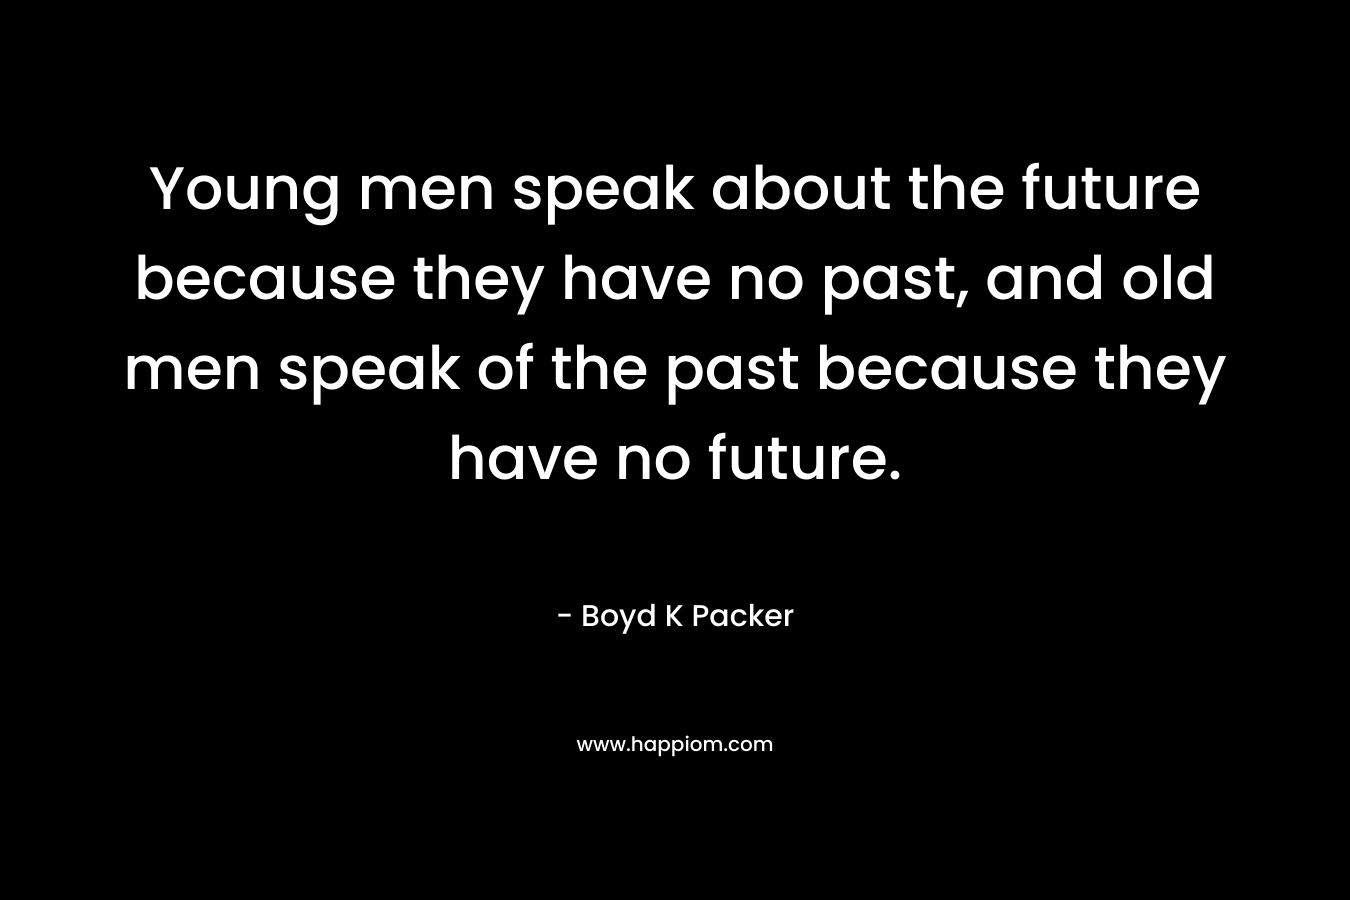 Young men speak about the future because they have no past, and old men speak of the past because they have no future.